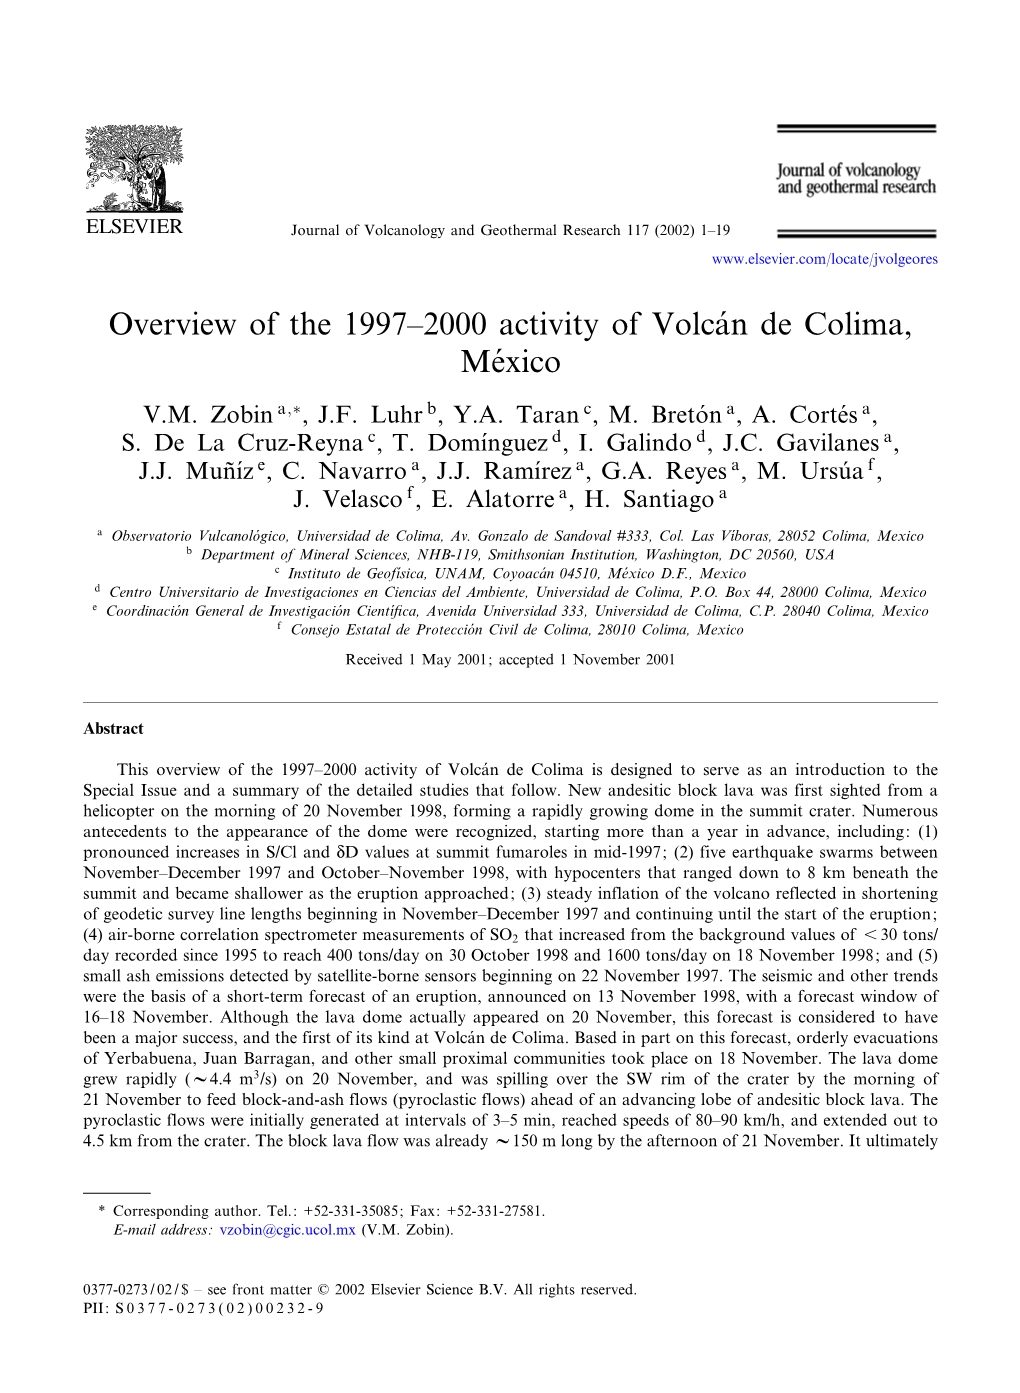 Overview of the 1997^2000 Activity of Volca¤N De Colima, Me¤Xico